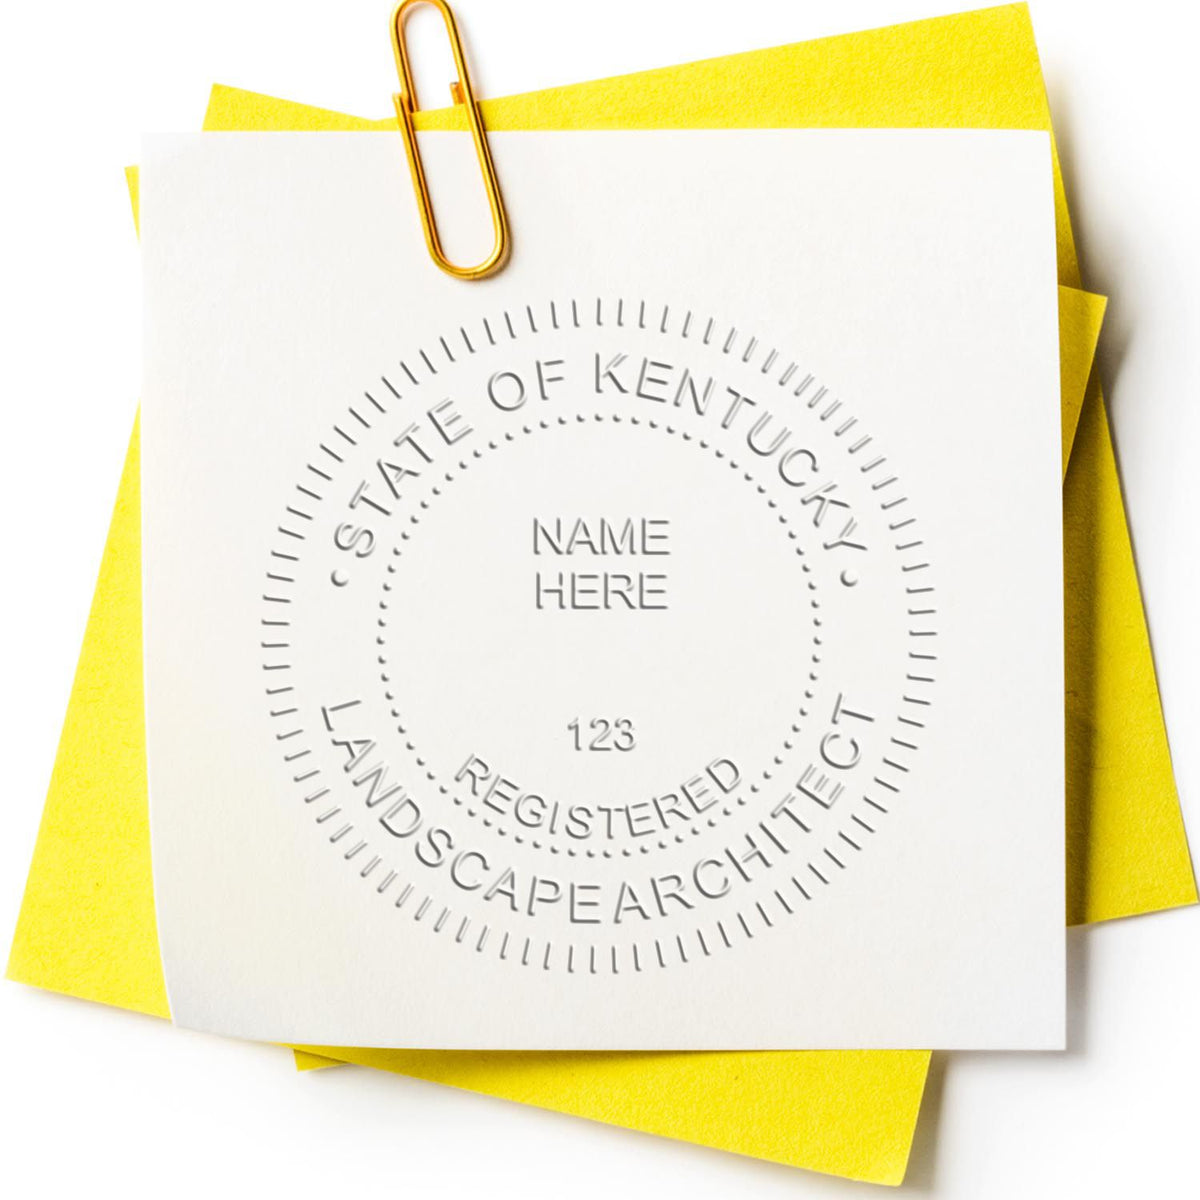 A stamped imprint of the Gift Kentucky Landscape Architect Seal in this stylish lifestyle photo, setting the tone for a unique and personalized product.